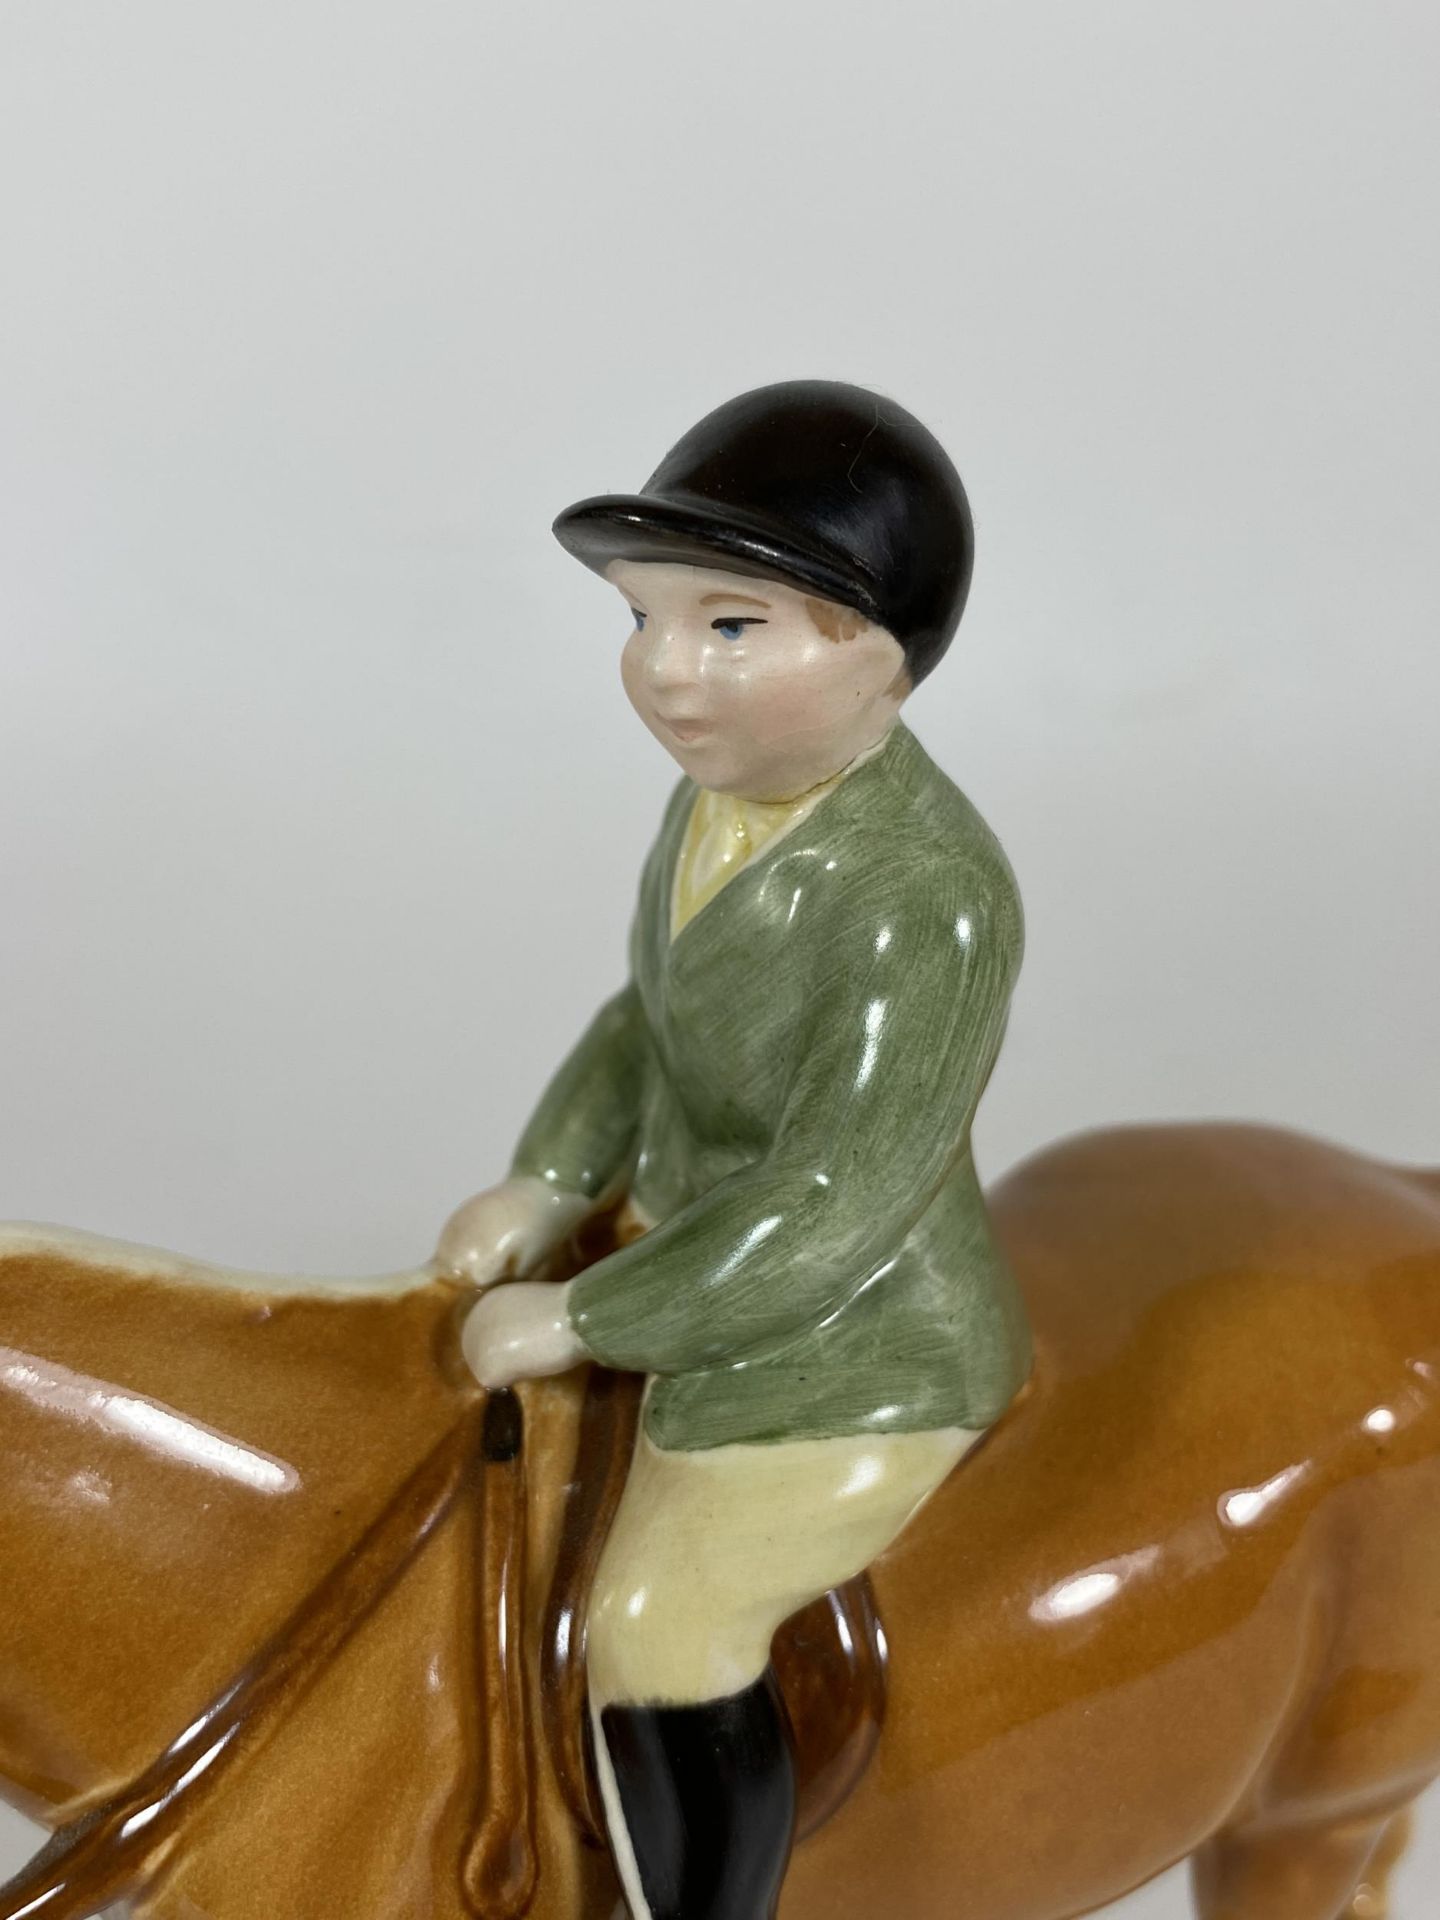 A BESWICK BOY ON PALOMINO PONY, MODEL NO. 1500, (HEAD RE-GLUED) ALSO FRONT LEG ALSO RE-GLUED - Image 3 of 5